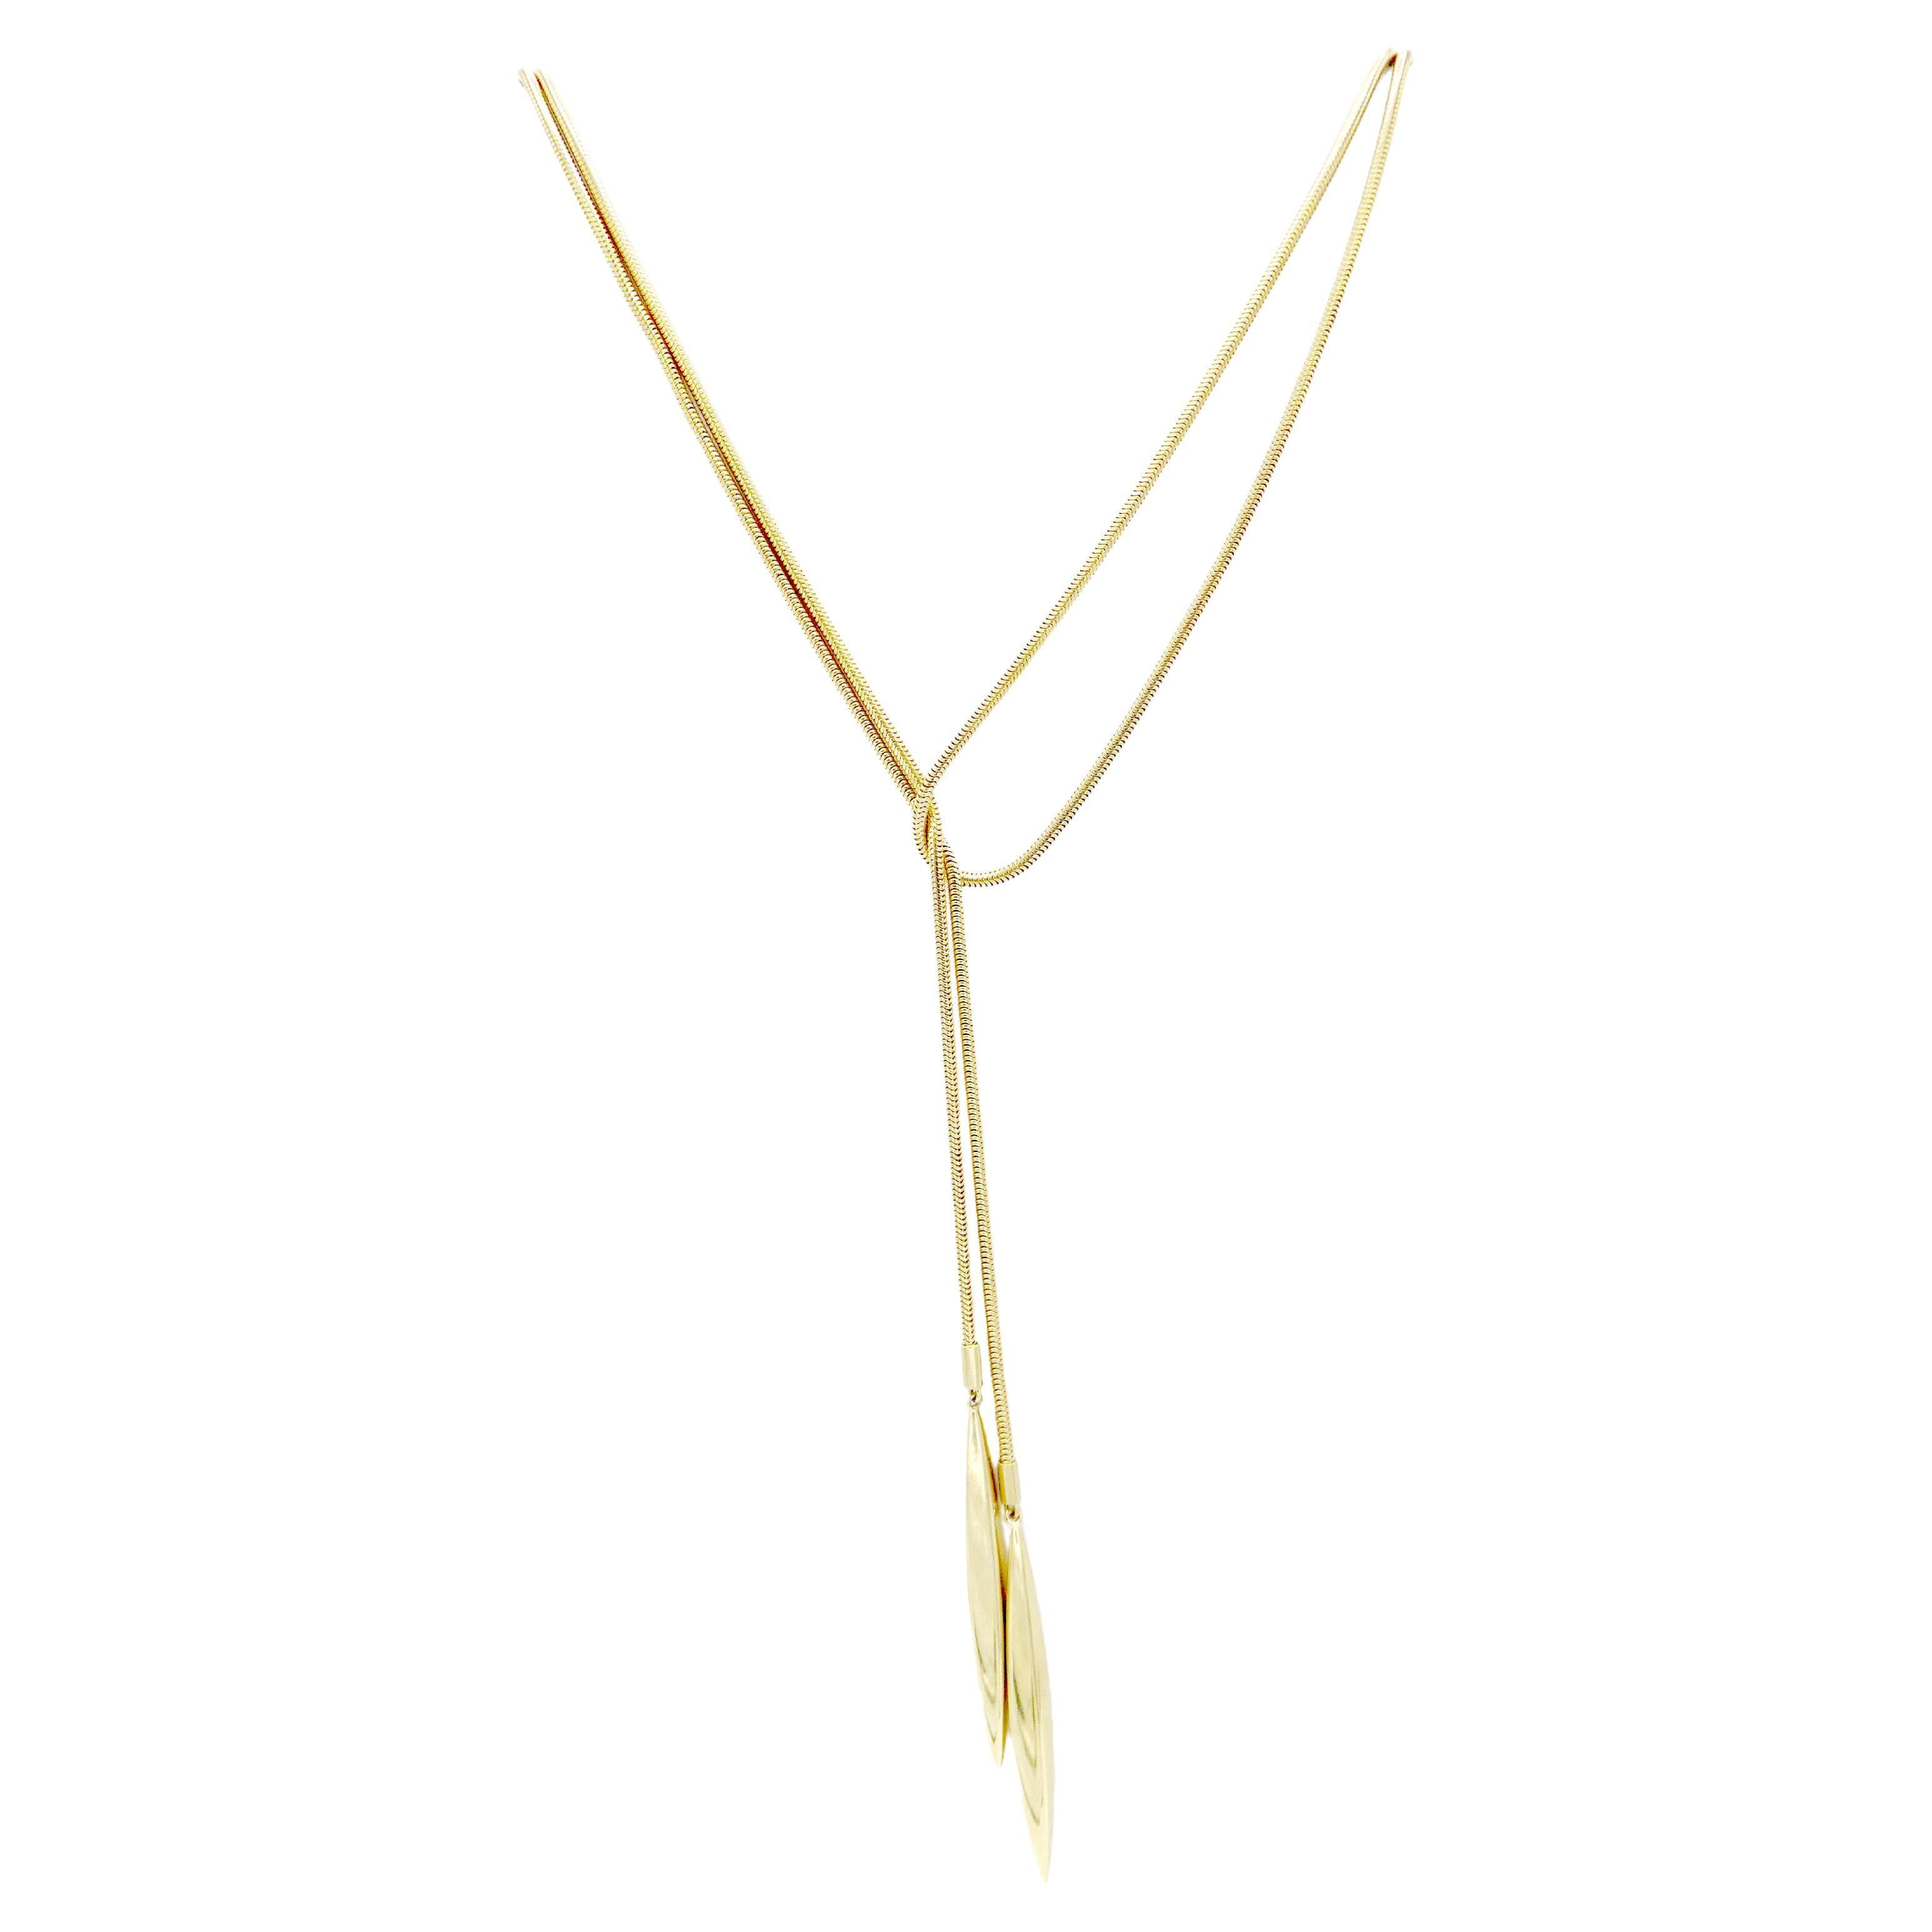 Tiffany & Co. 18 Karat Gold Lariat Double Feather Snake Chain Wrap Necklace